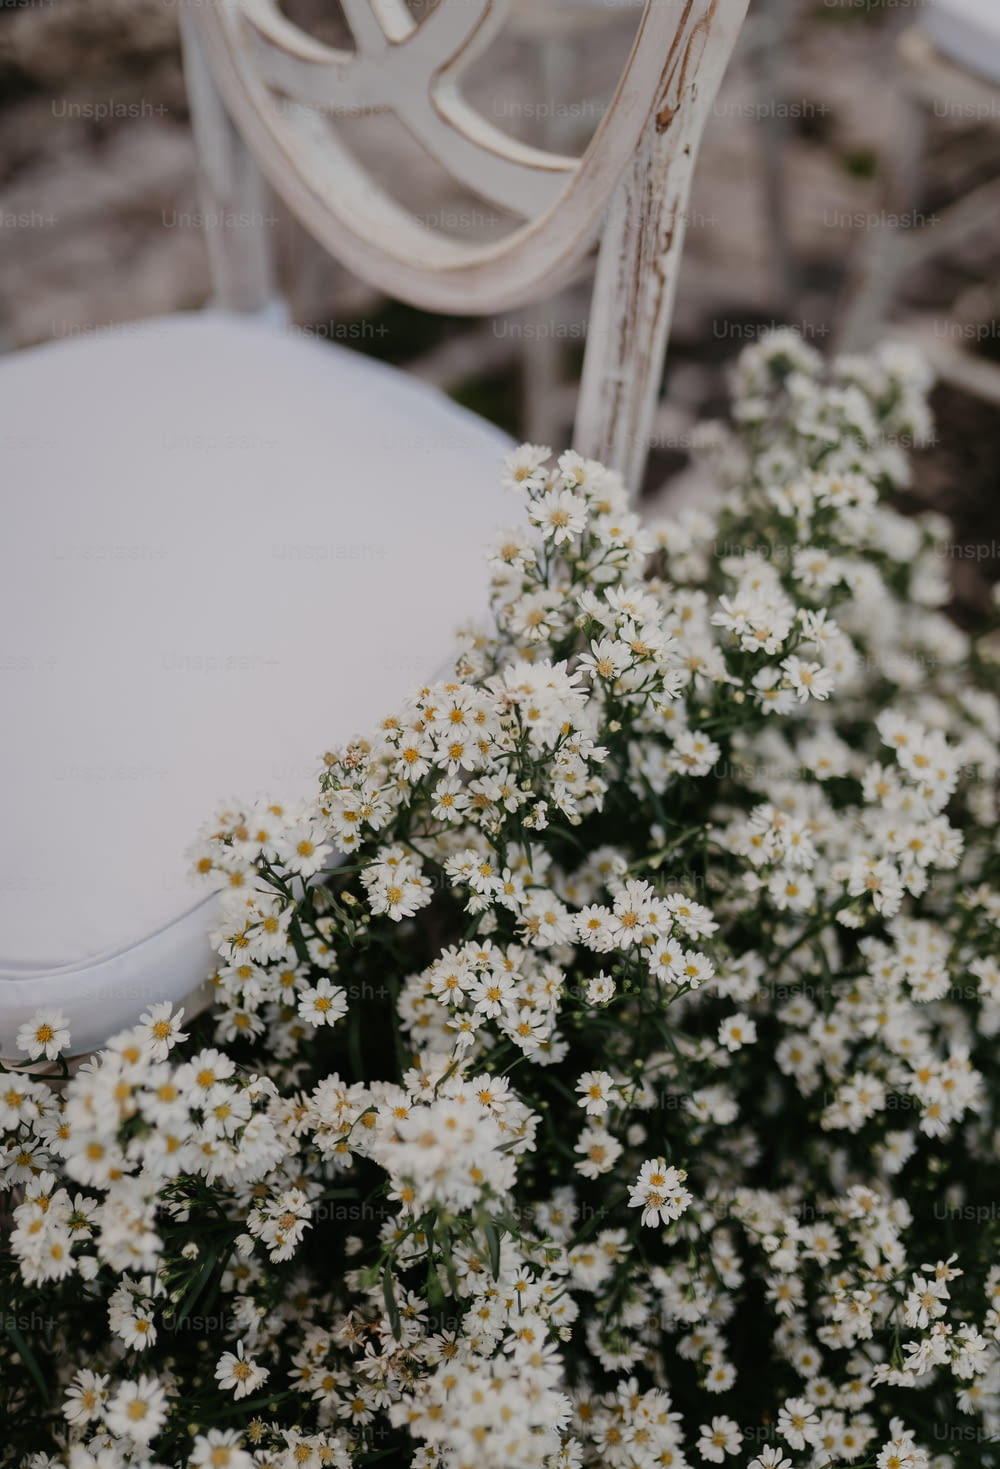 a white chair sitting next to a bunch of white flowers